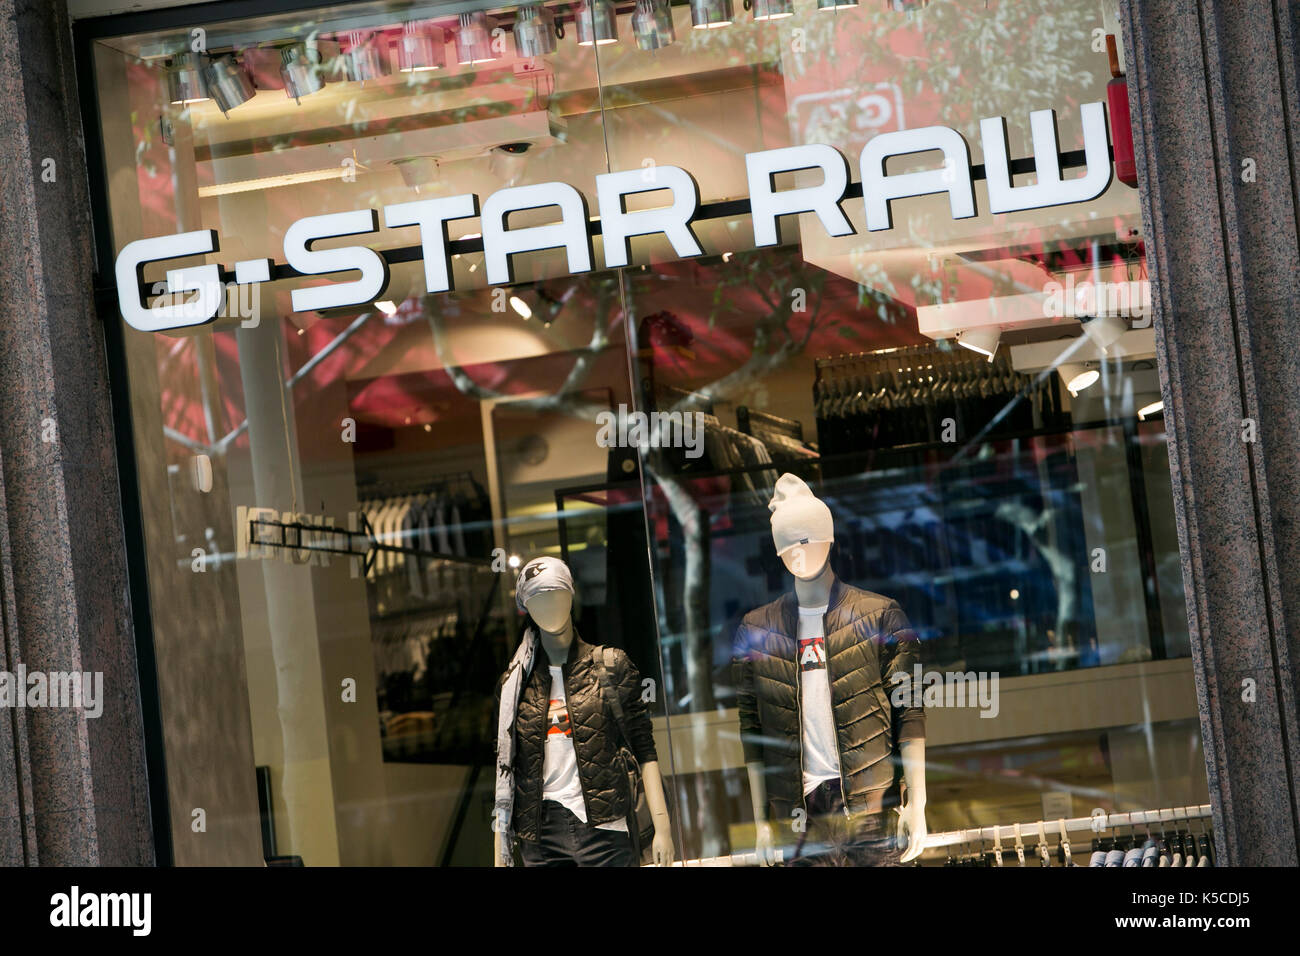 g star clothing store